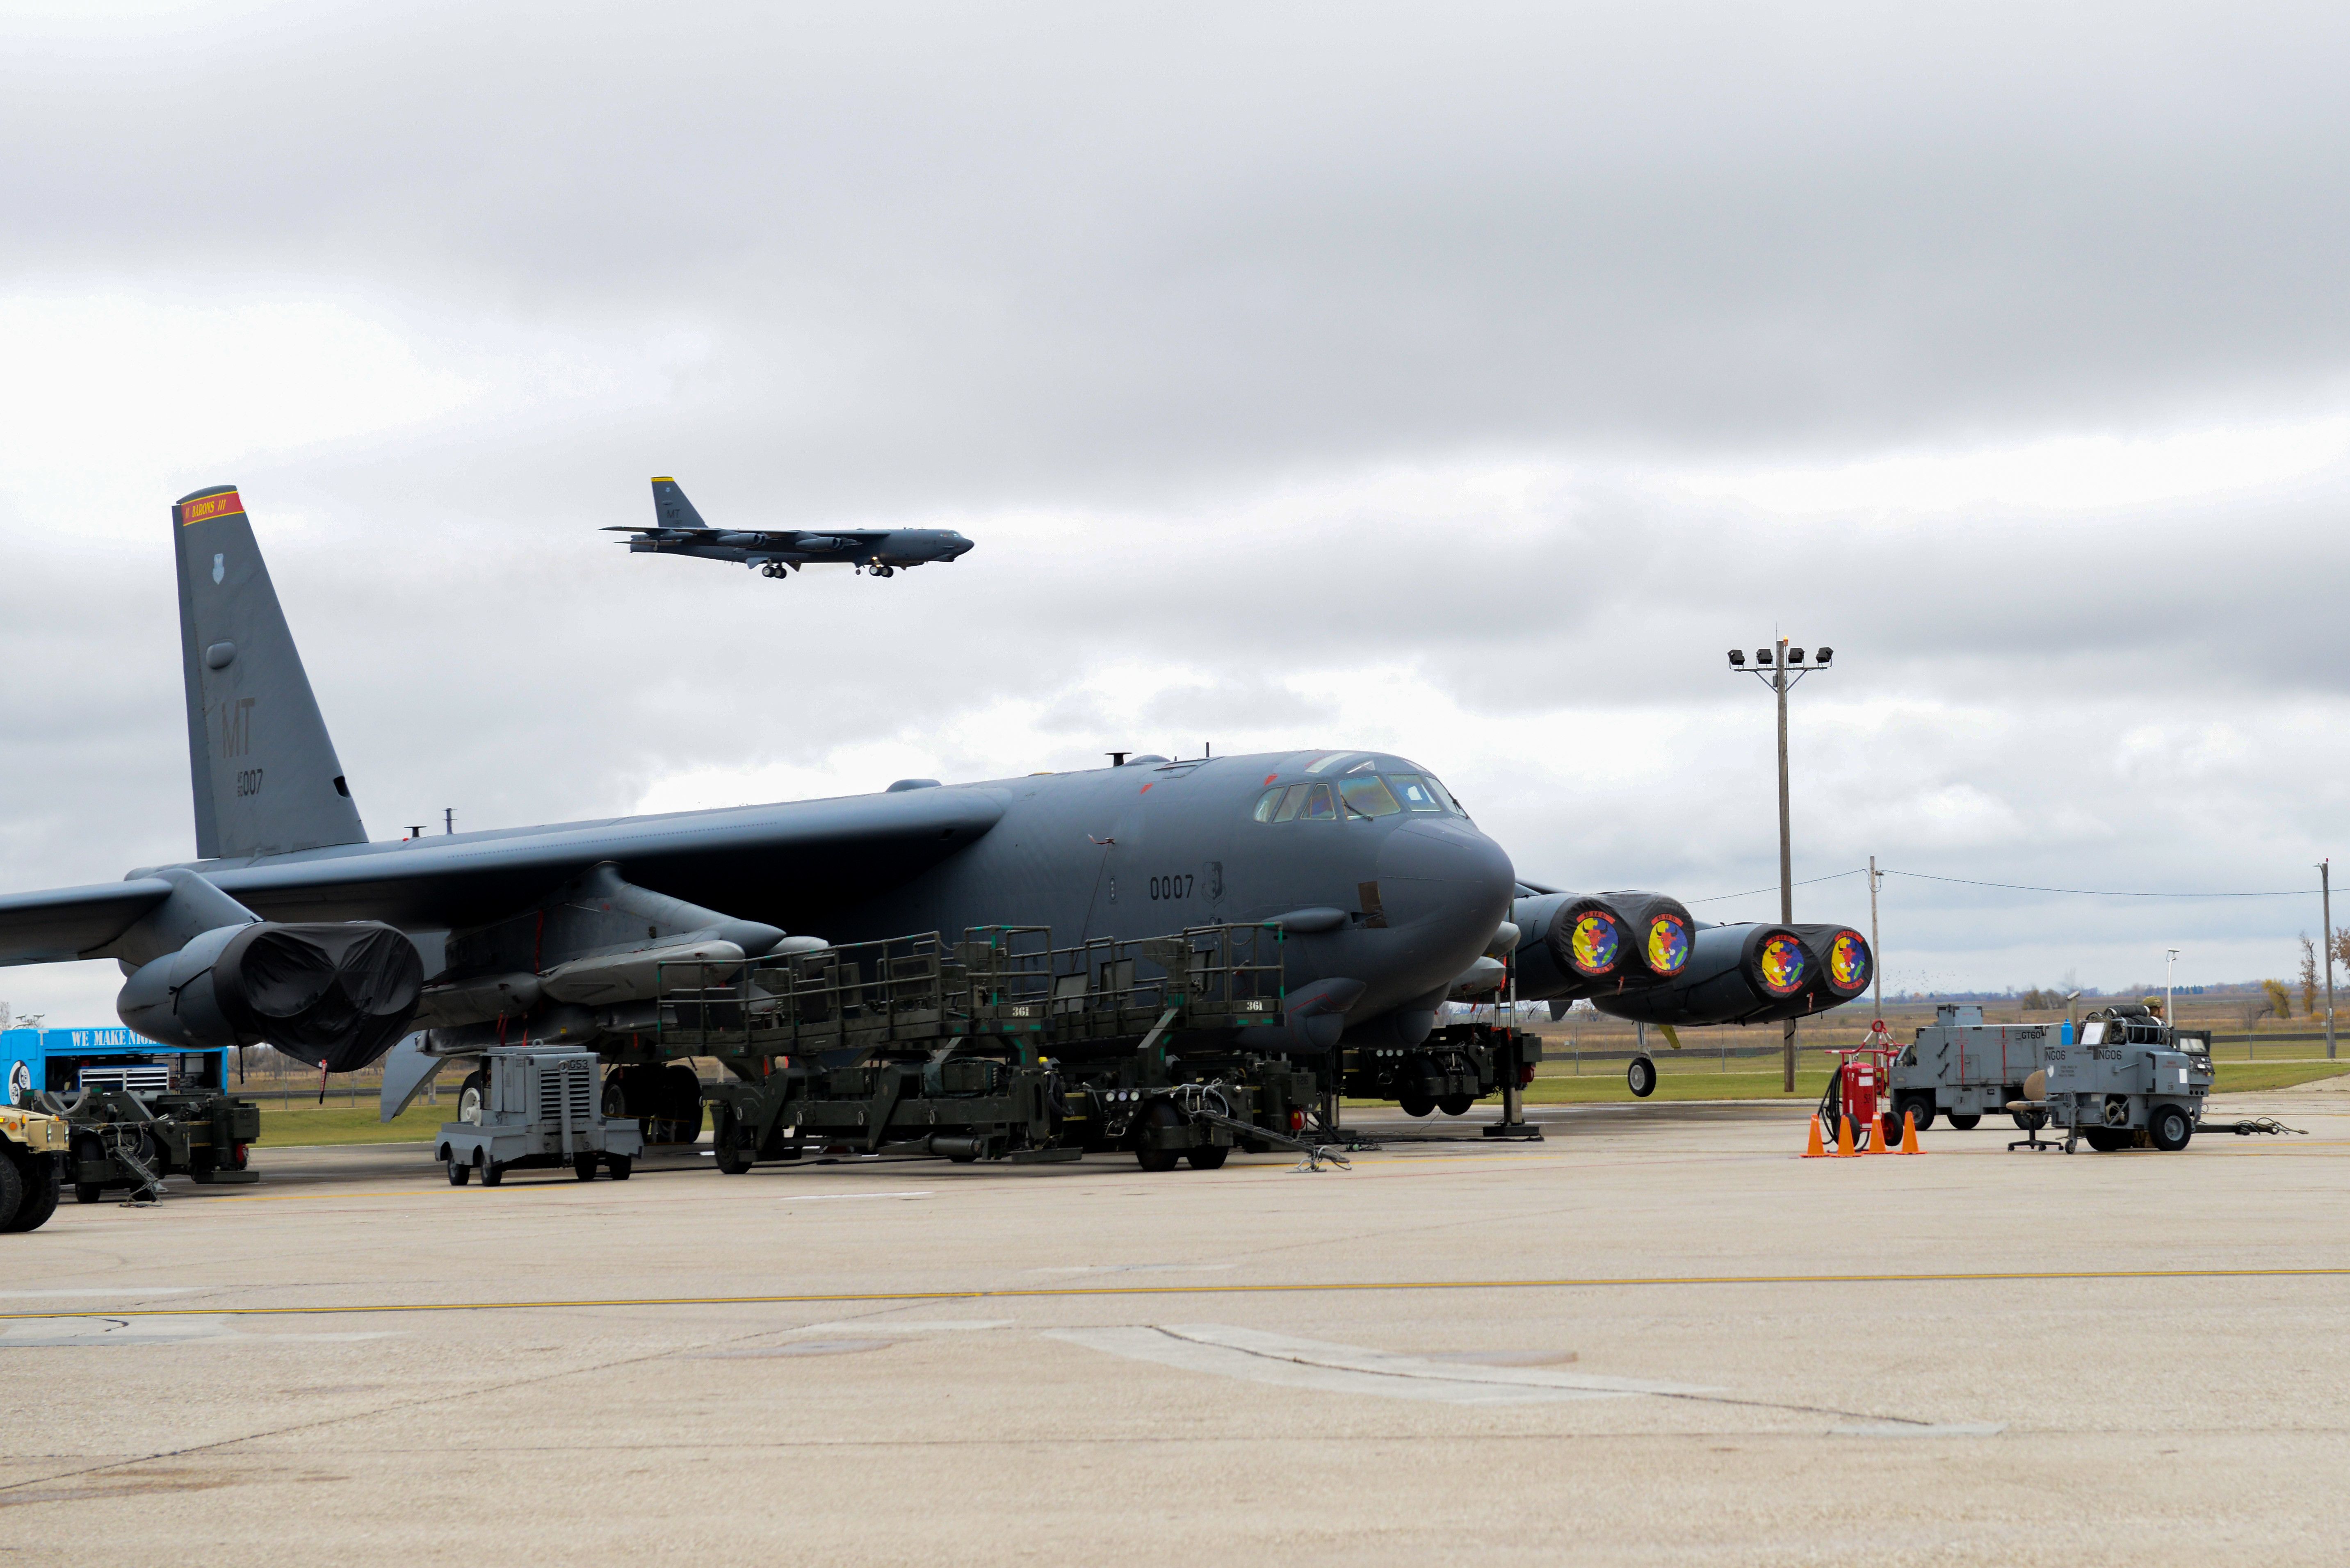 A Boeing B-52 on an airfield apron.